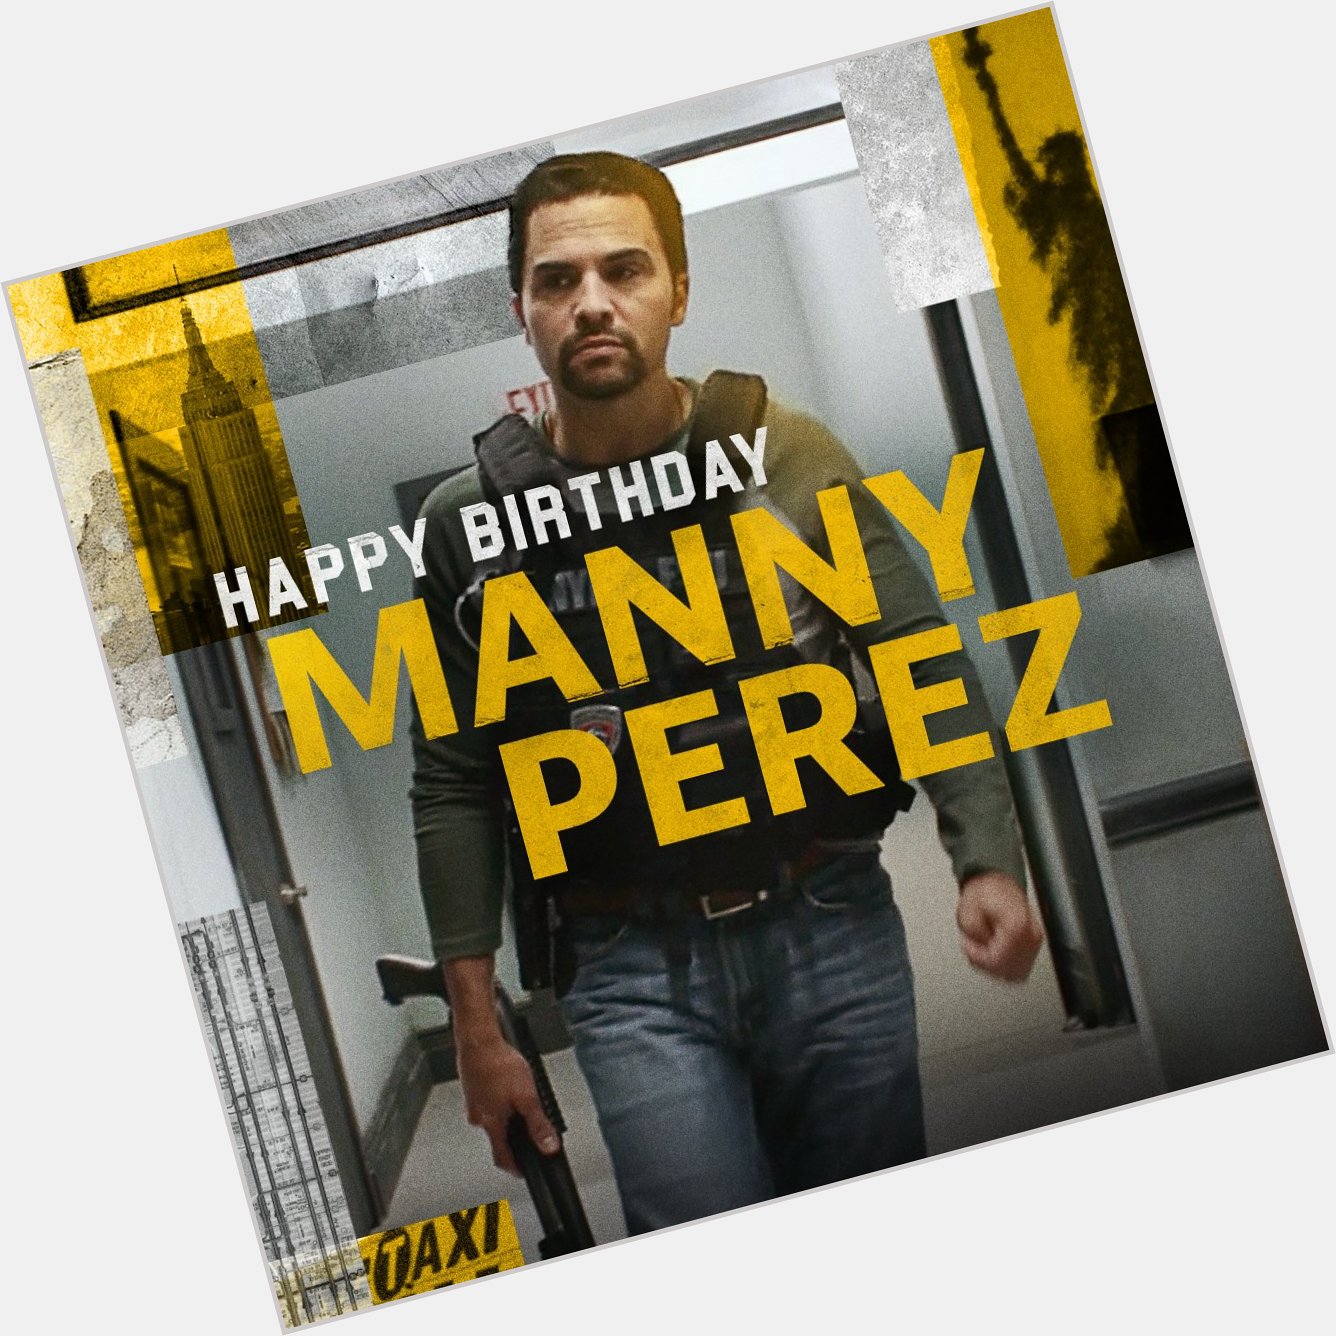 Happy Birthday to our detective on the case - Manny Perez! 